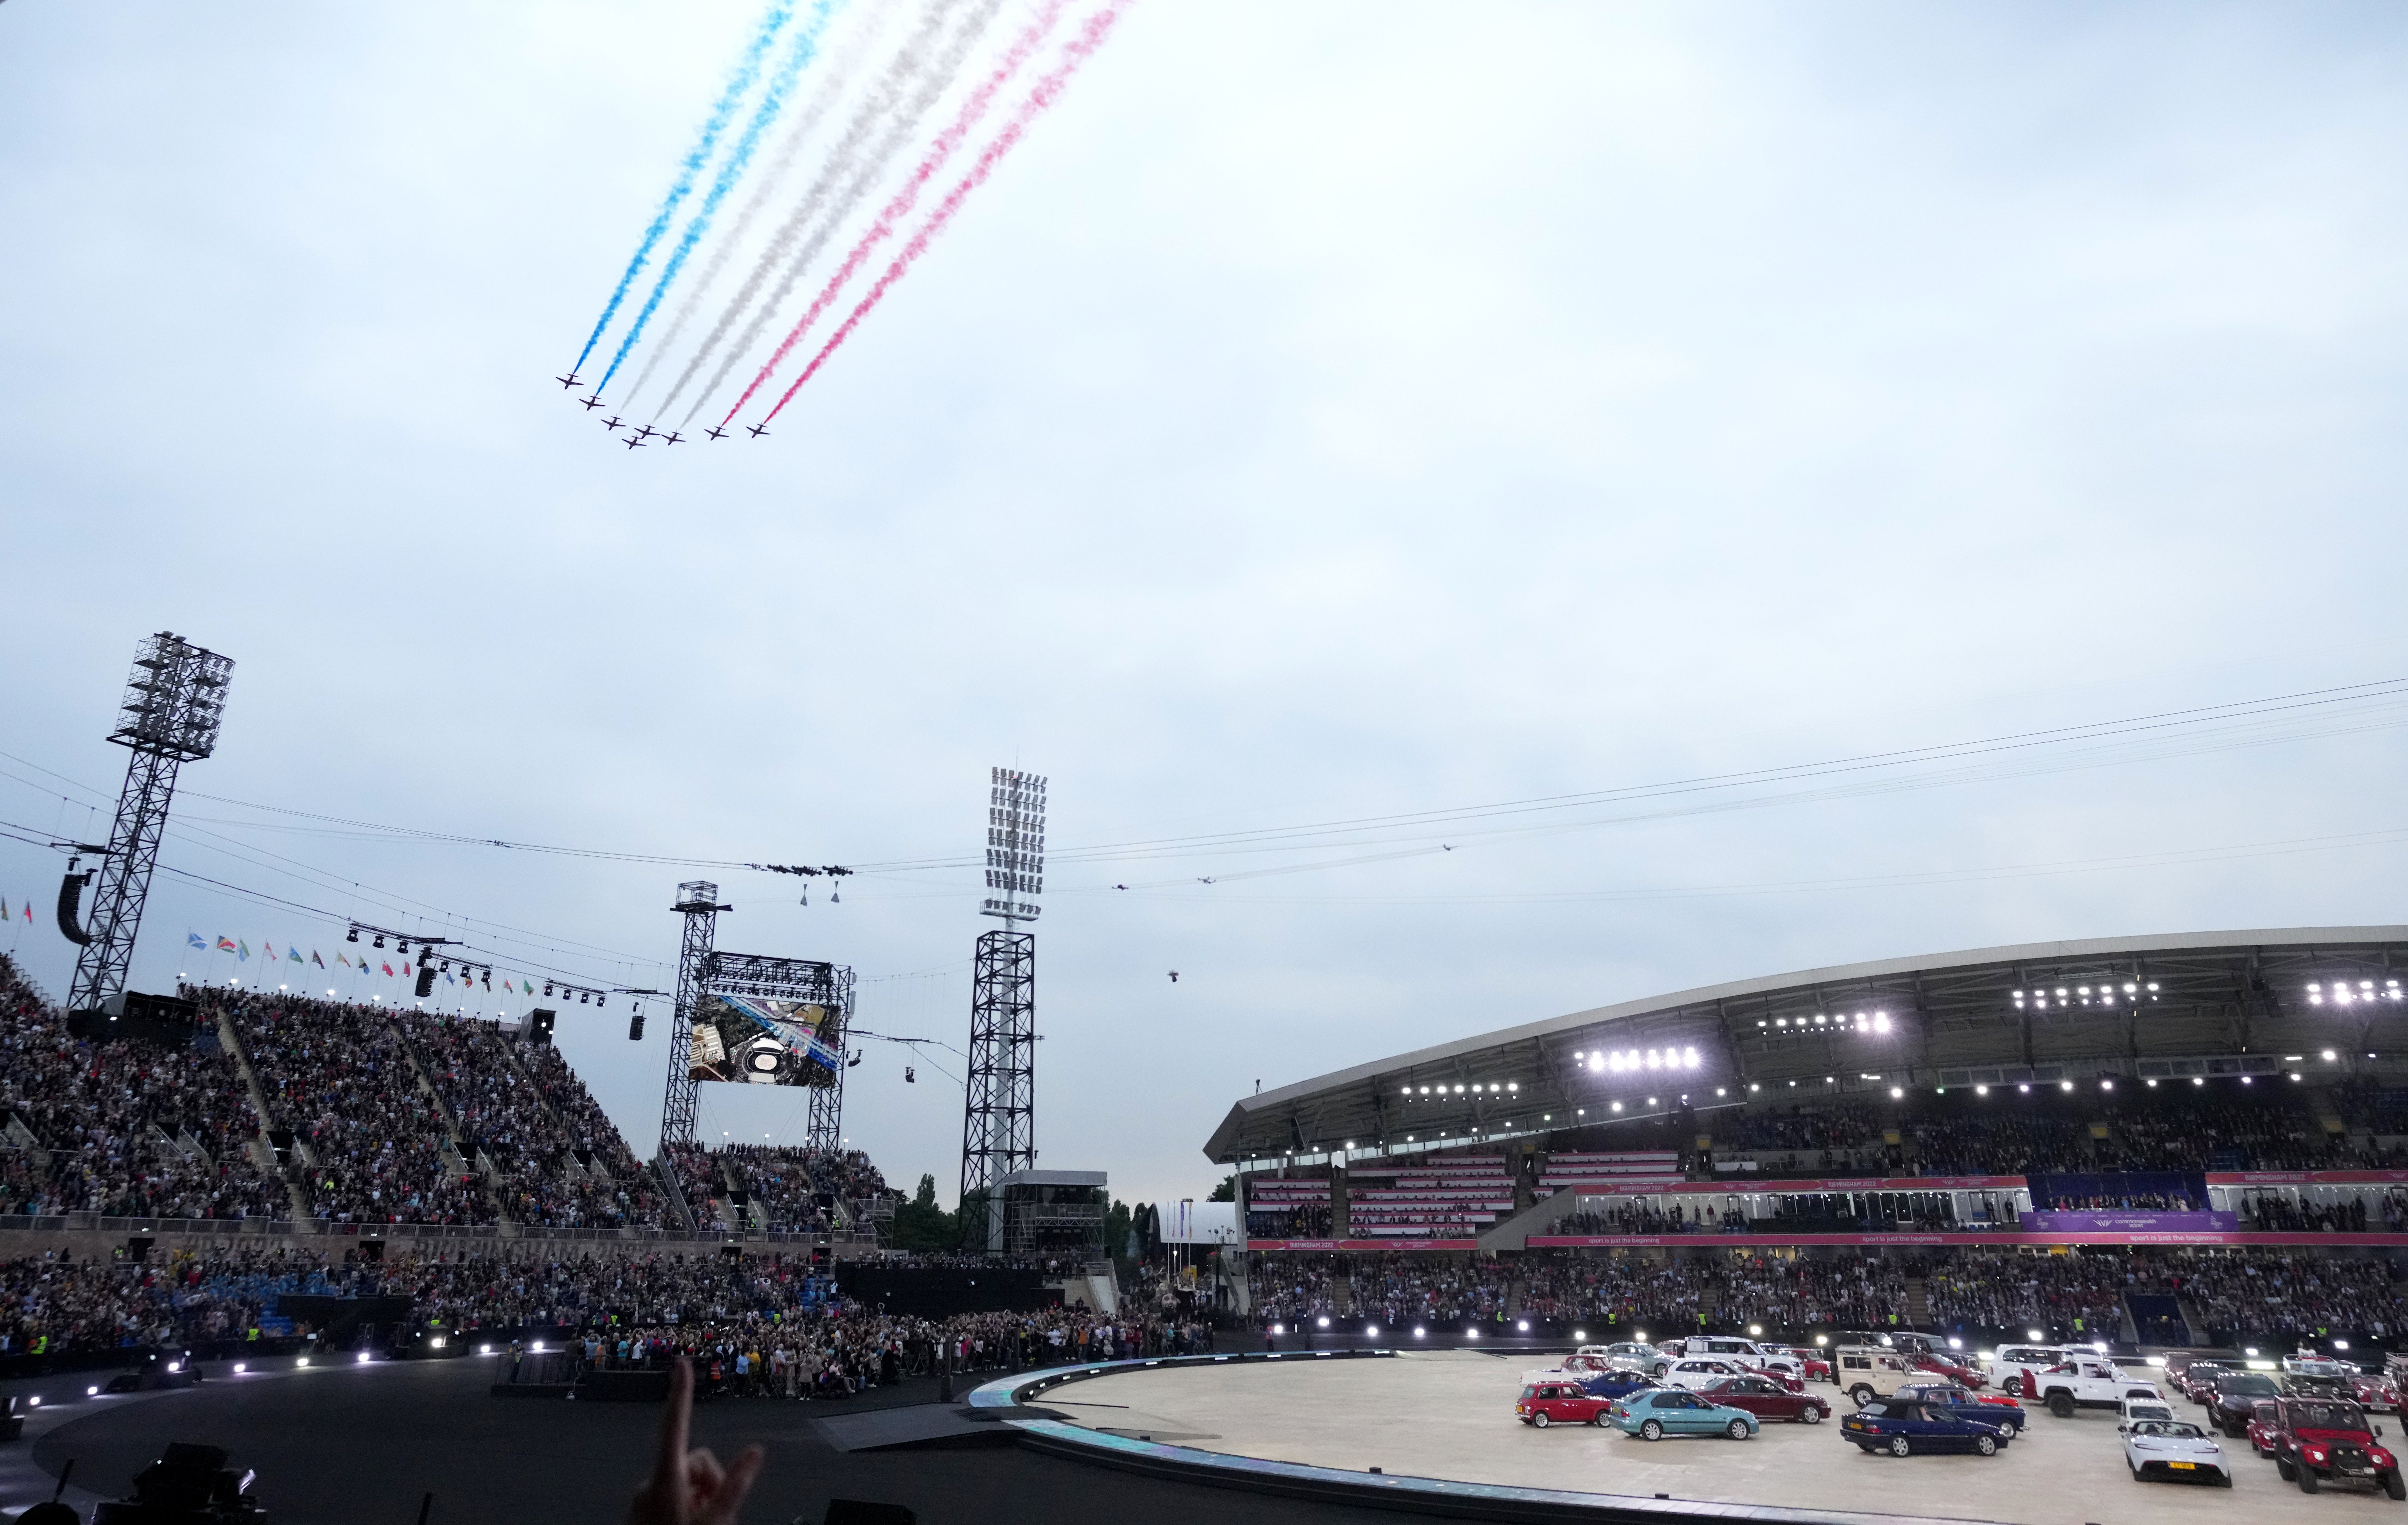 The Red Arrows flew over the stadium during the opening ceremony (Tim Goode/PA)